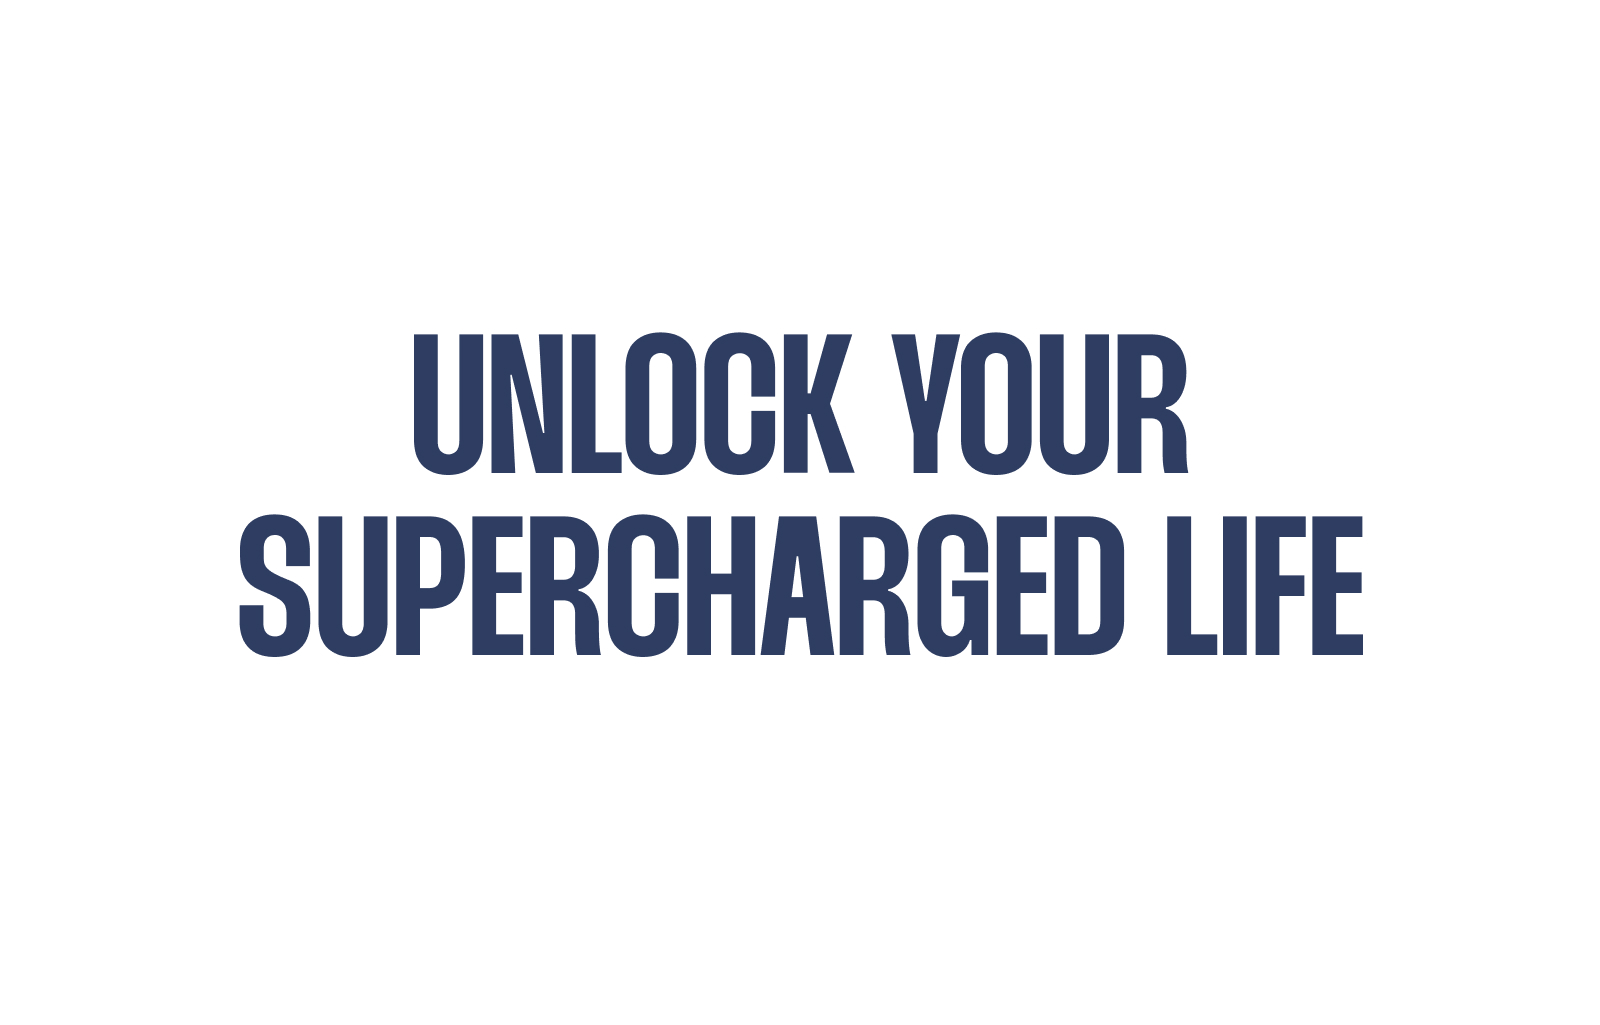 Unlock Your Supercharged Life with the Super Life Notion Template!